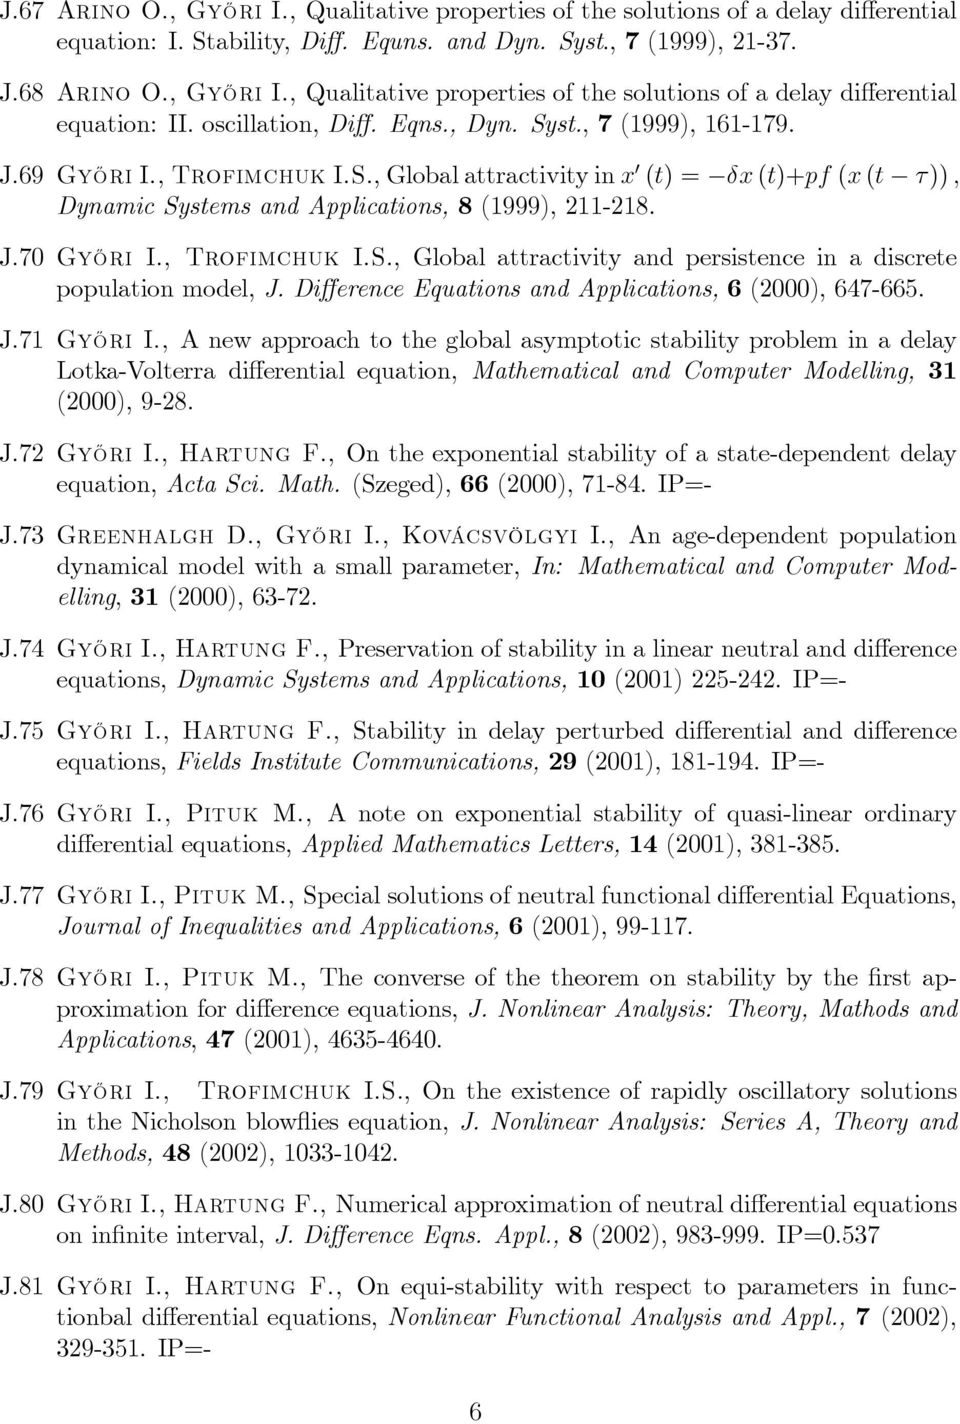 , Trofimchuk I.S., Global attractivity and persistence in a discrete population model, J. Di erence Equations and Applications, 6 (2000), 647-665. J.71 Gy½Ori I.